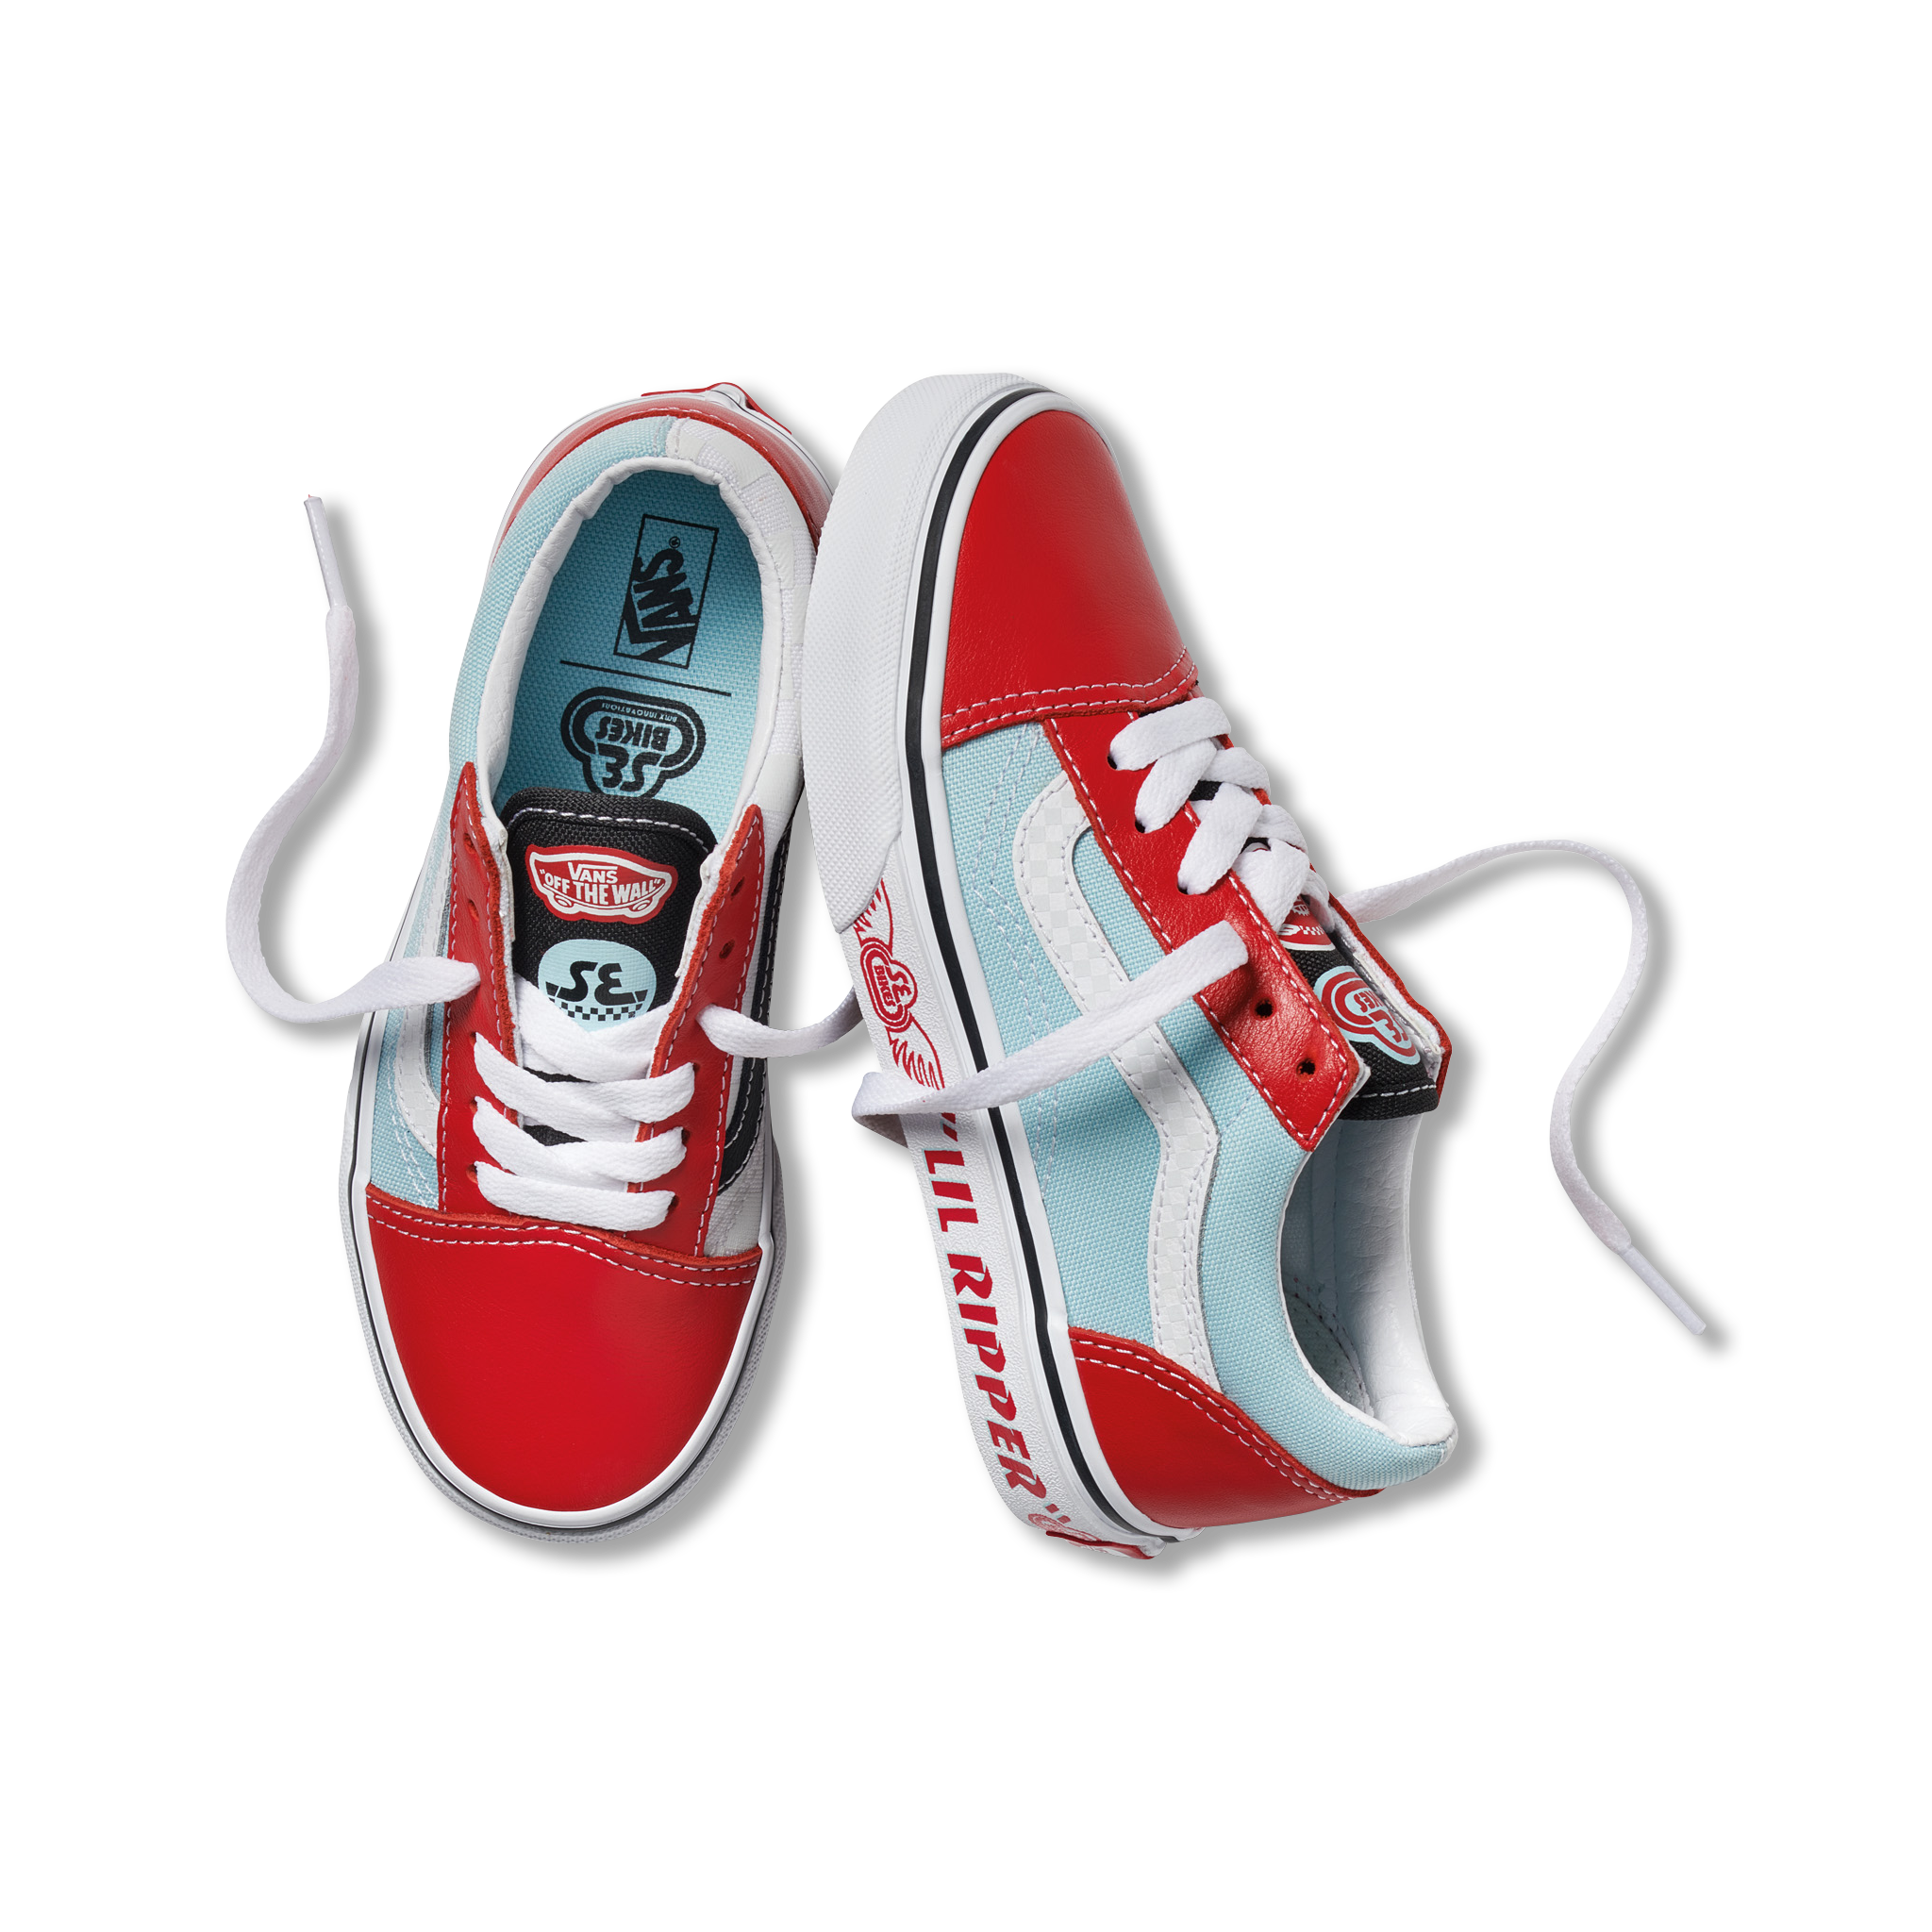 vans trainers red